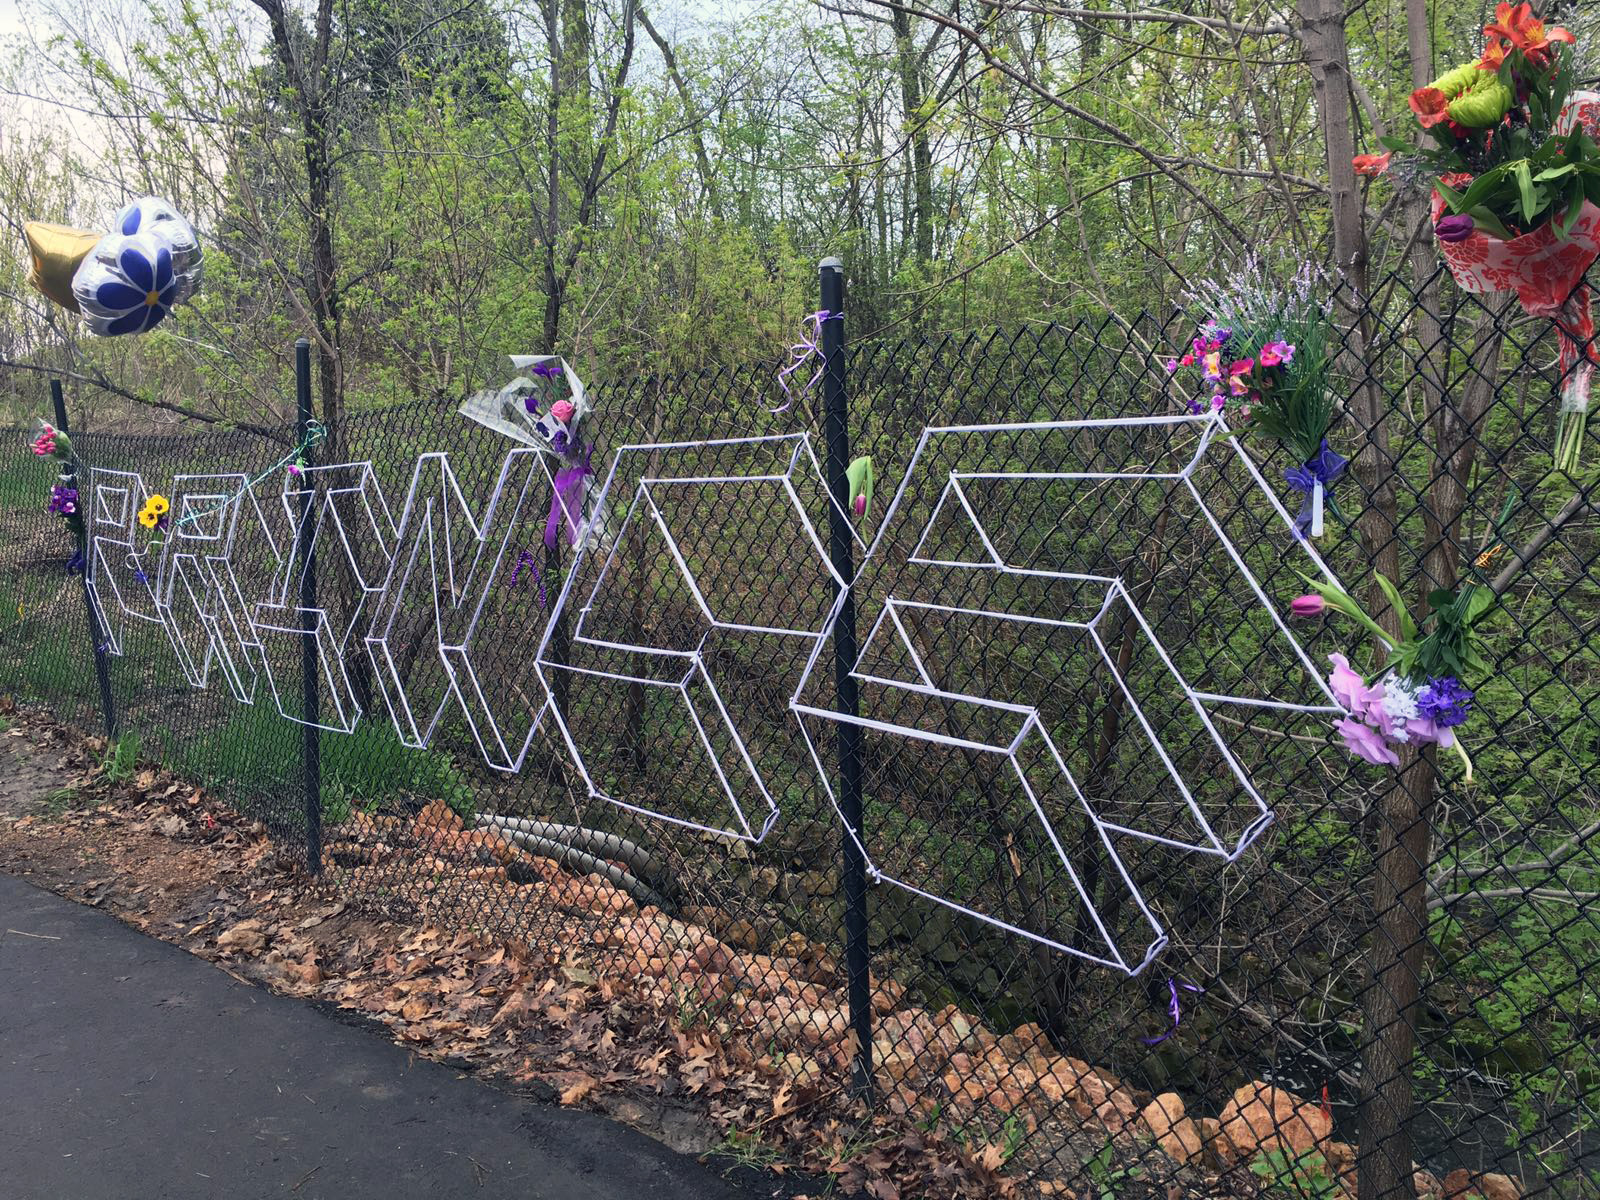 A fan tribute to prince on the chain-link fence outside Paisley Park. Photography: Tara McBride